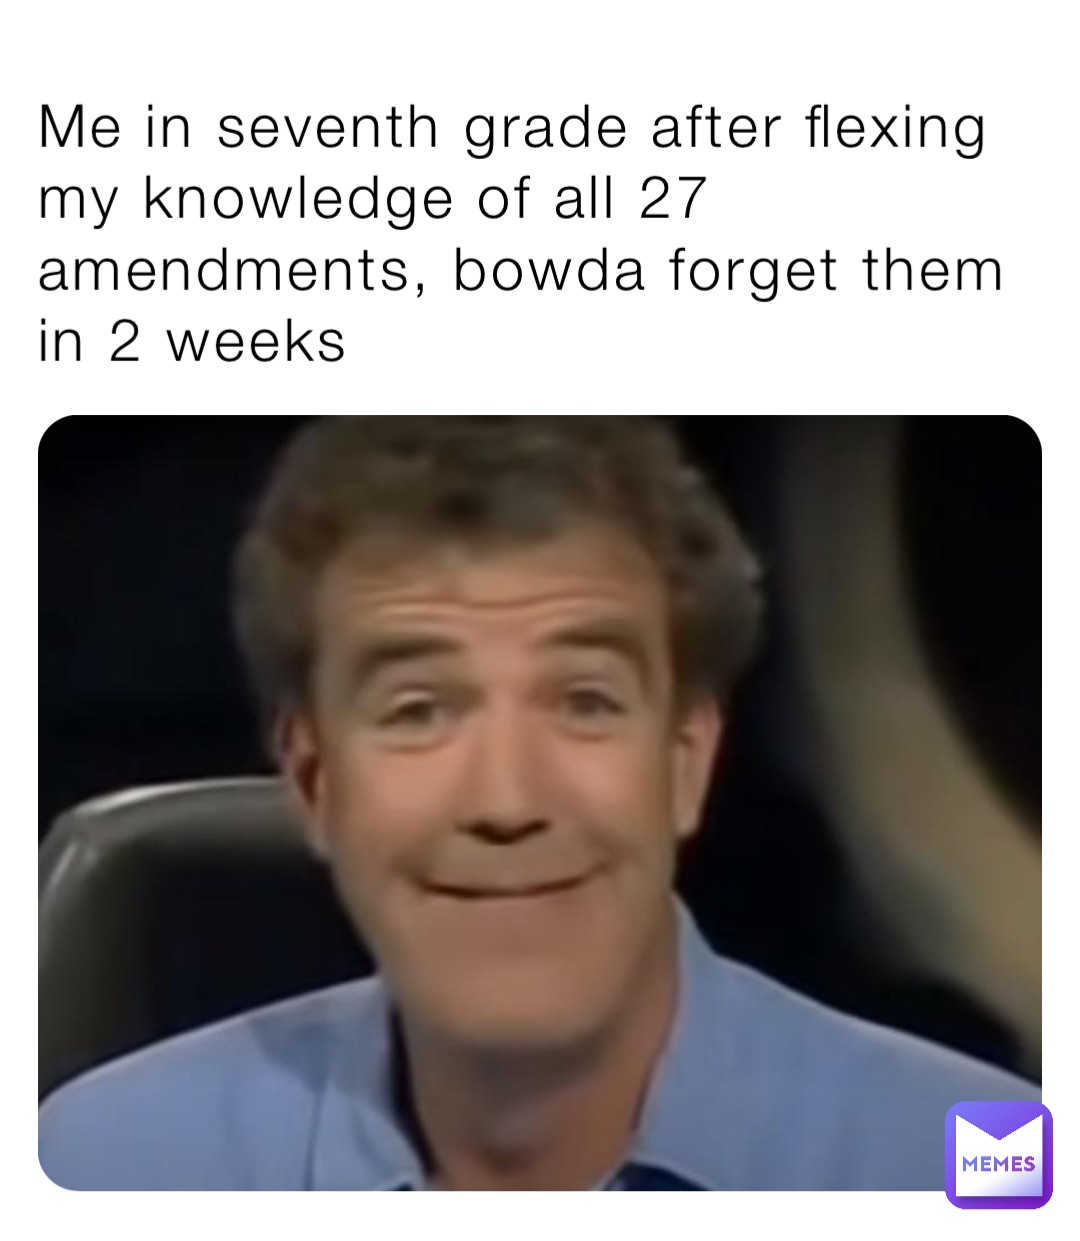 Me in seventh grade after flexing my knowledge of all 27 amendments, bowda forget them in 2 weeks